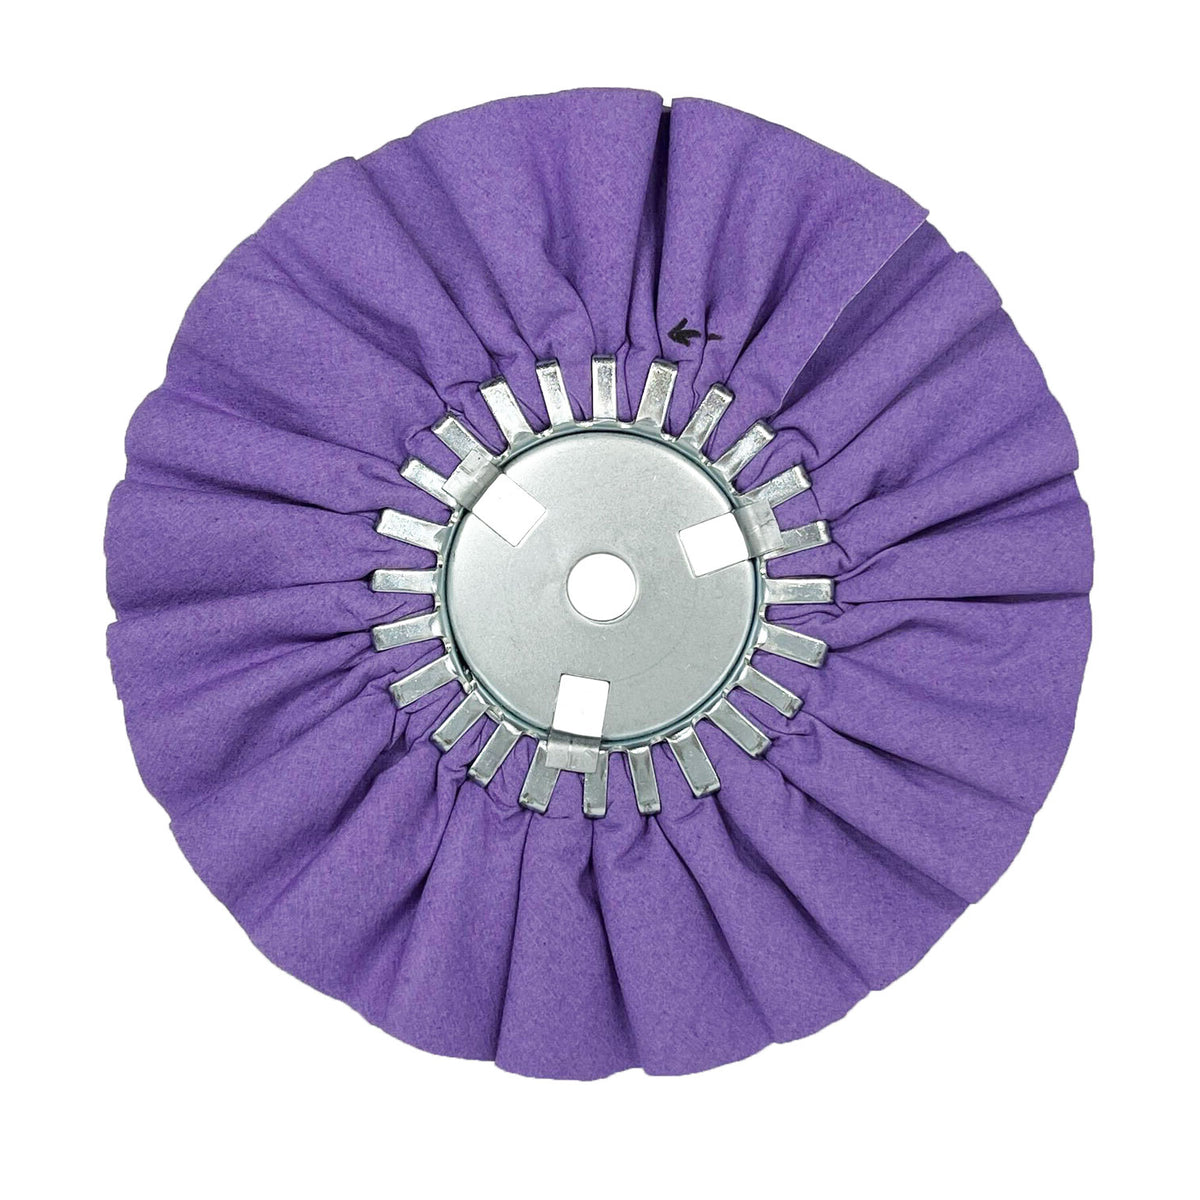 Renegade Products Purple Airway Buffing Wheel for Metal Polishing, displayed on a neutral background. This professional-grade buffing wheel is specifically designed for polishing metals, featuring a unique purple coloring and sturdy construction. Ideal for achieving a smooth and reflective finish on a variety of metal surfaces.